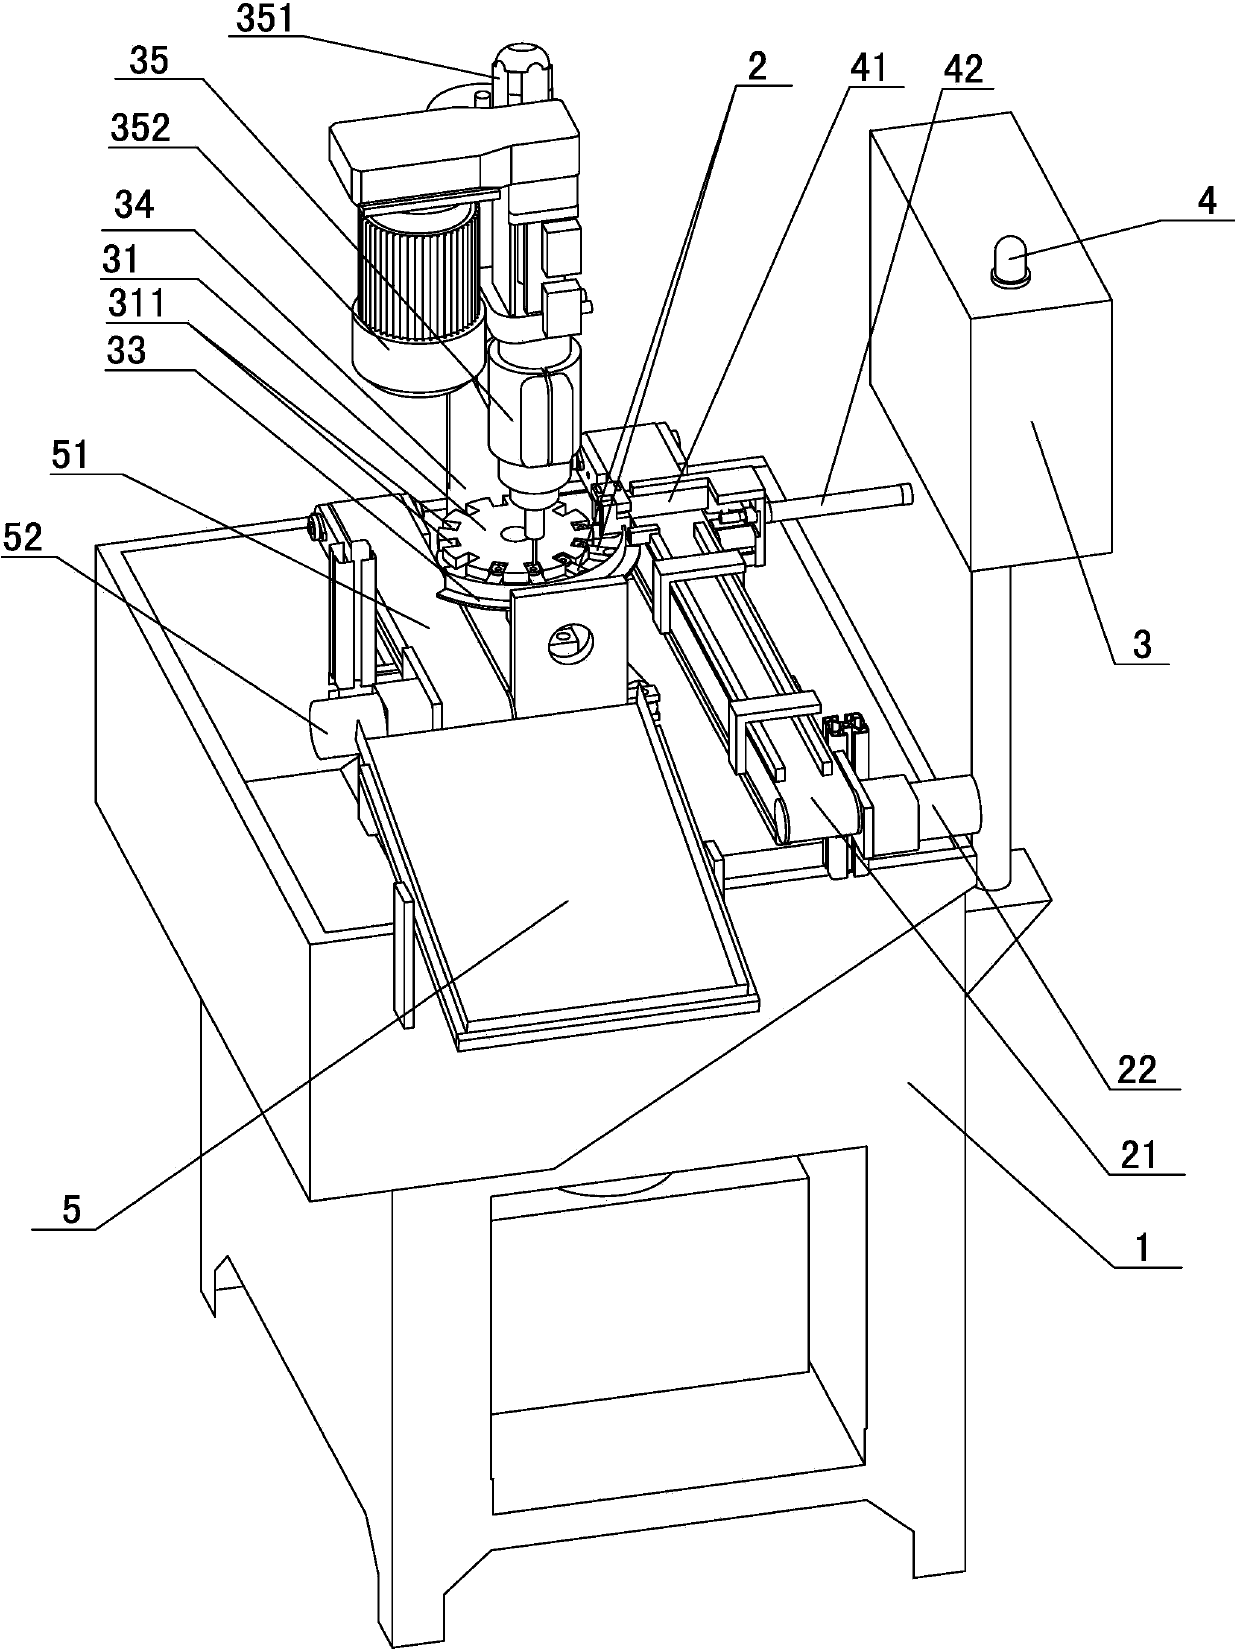 Numerical control tapping device